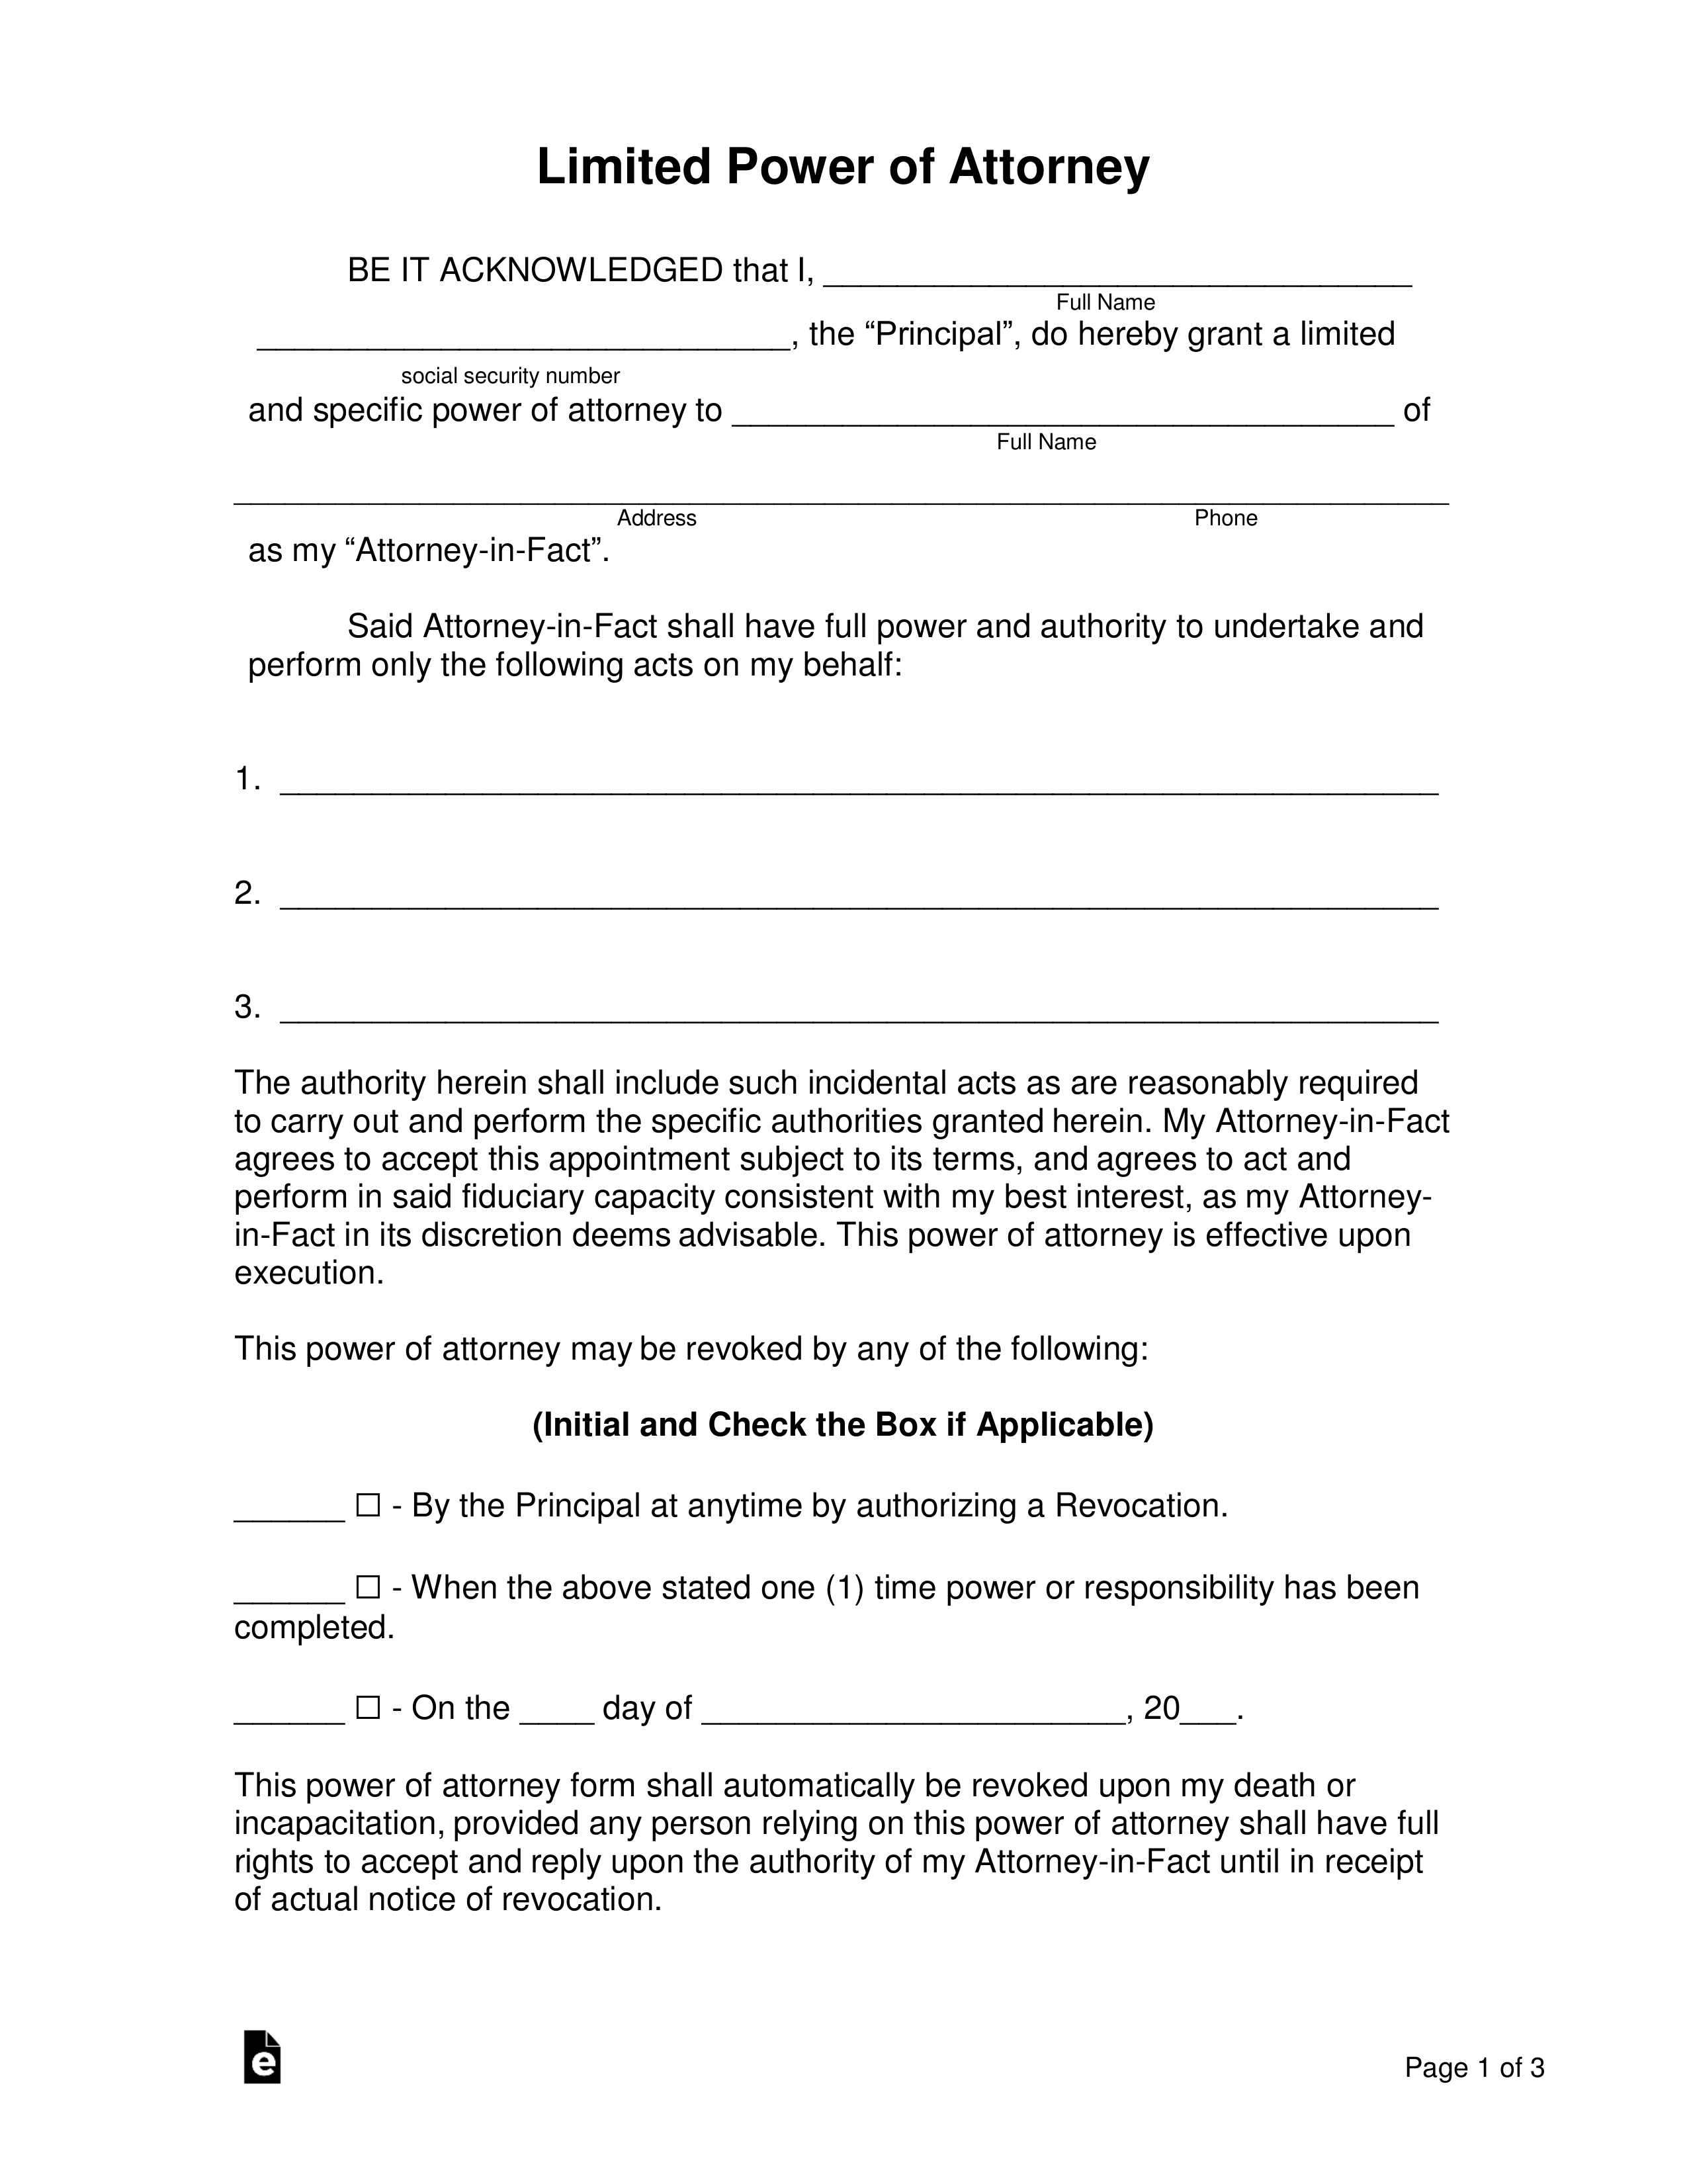 power of attorney form hard copy
 Free Limited (Special) Power of Attorney Forms - PDF | Word ...